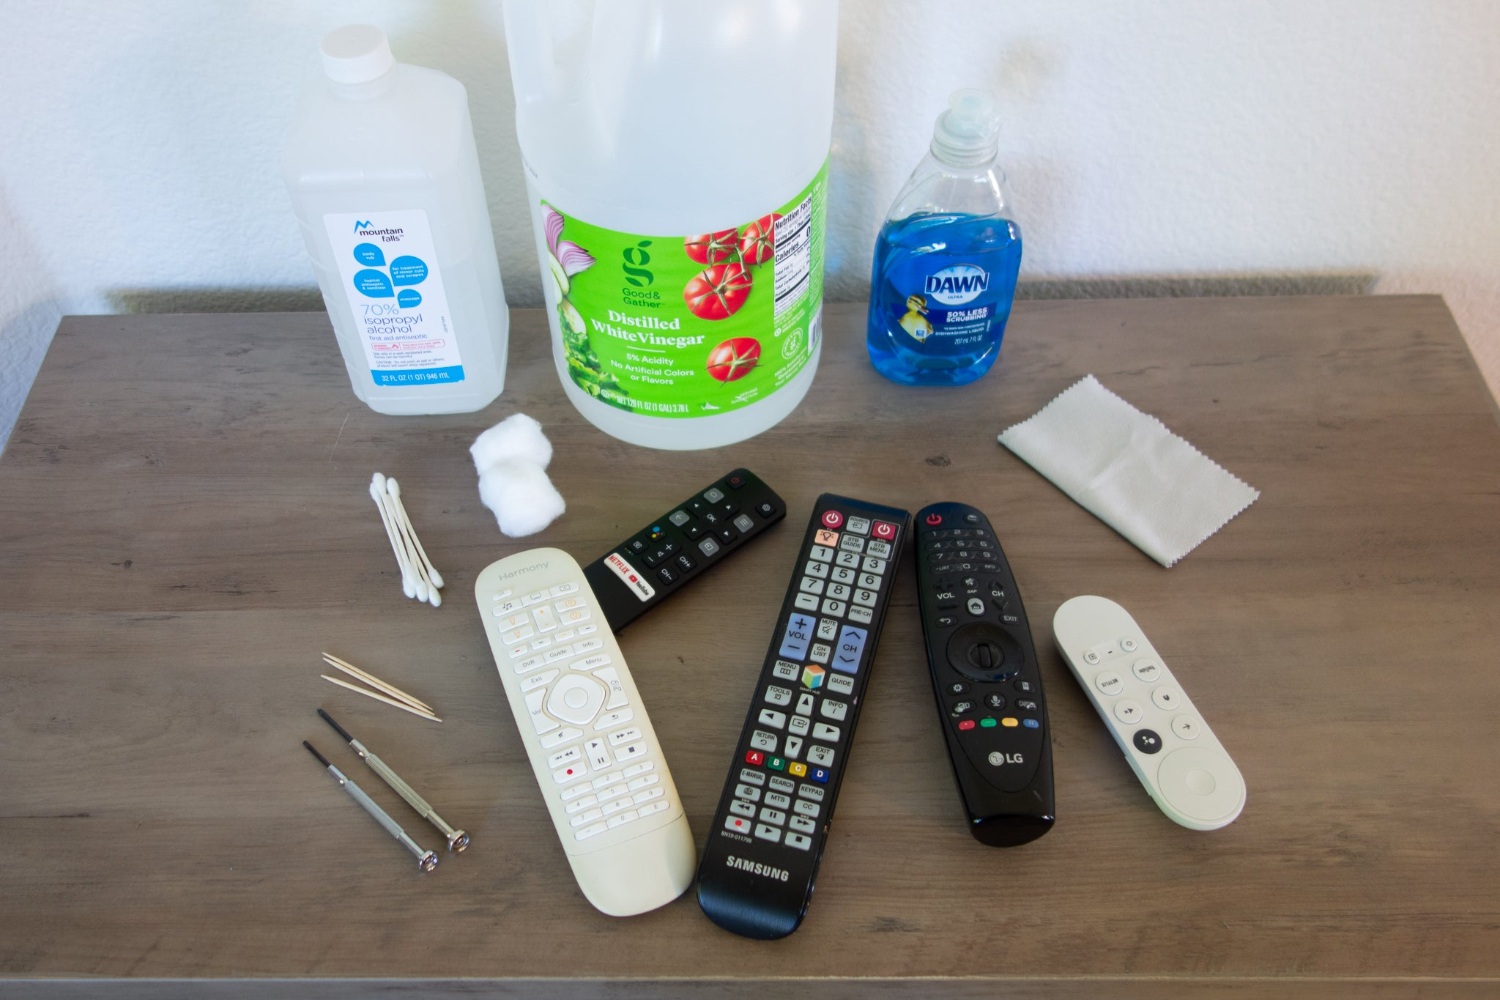 Clean the buttons and surface of the remote control